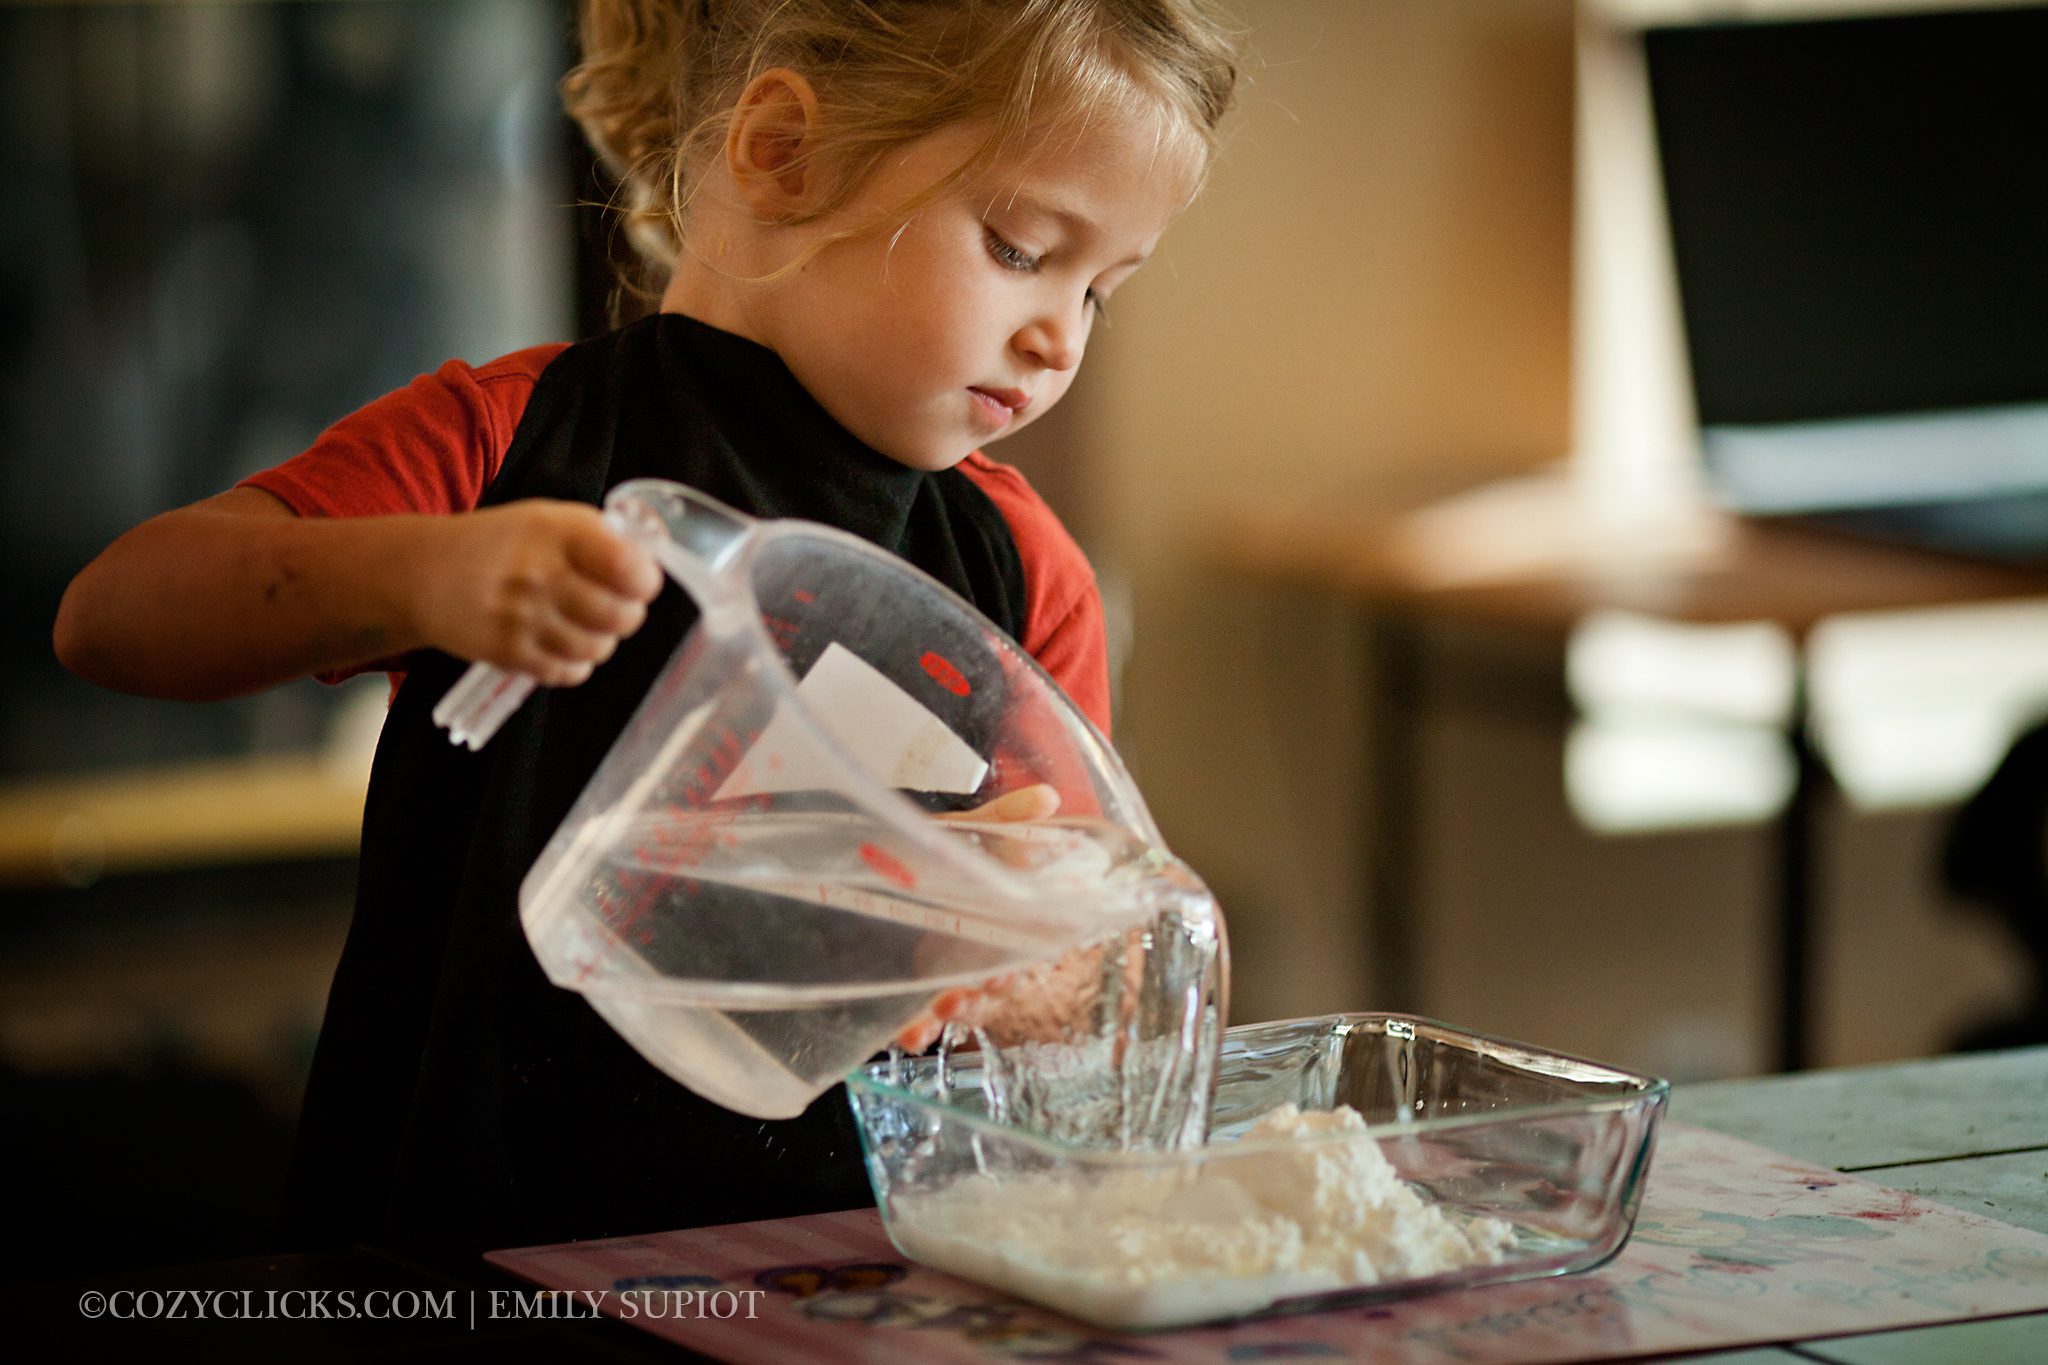 Mixing cornstarch and water makes a fun kids project